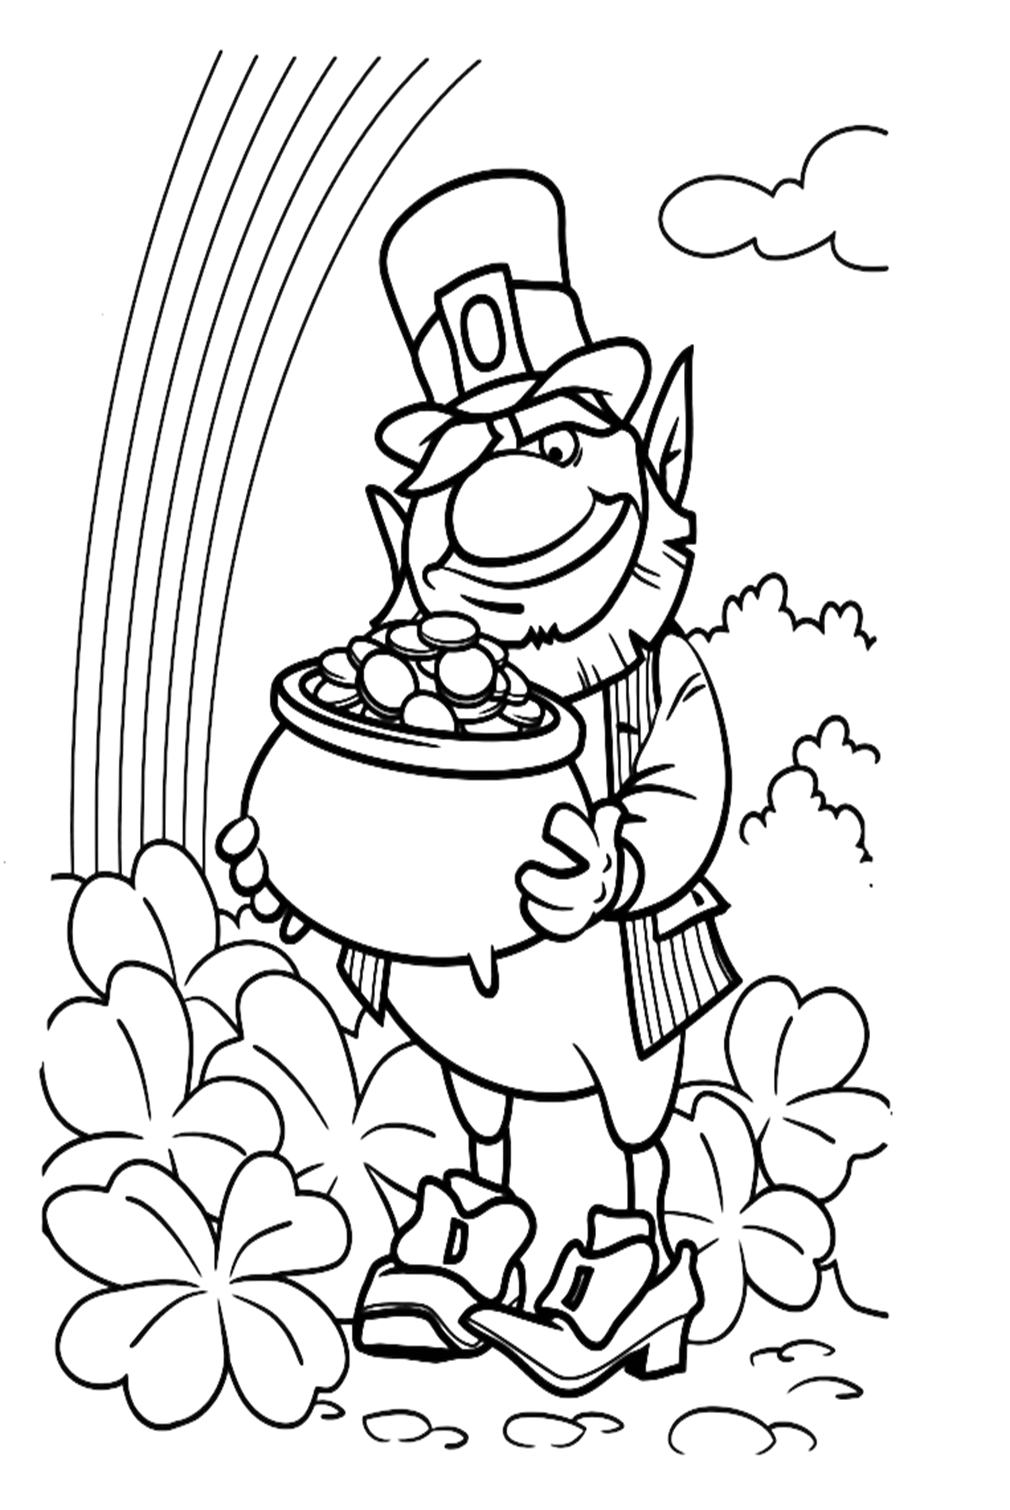 Rainbow Coloring Sheet Printable from Rainbow